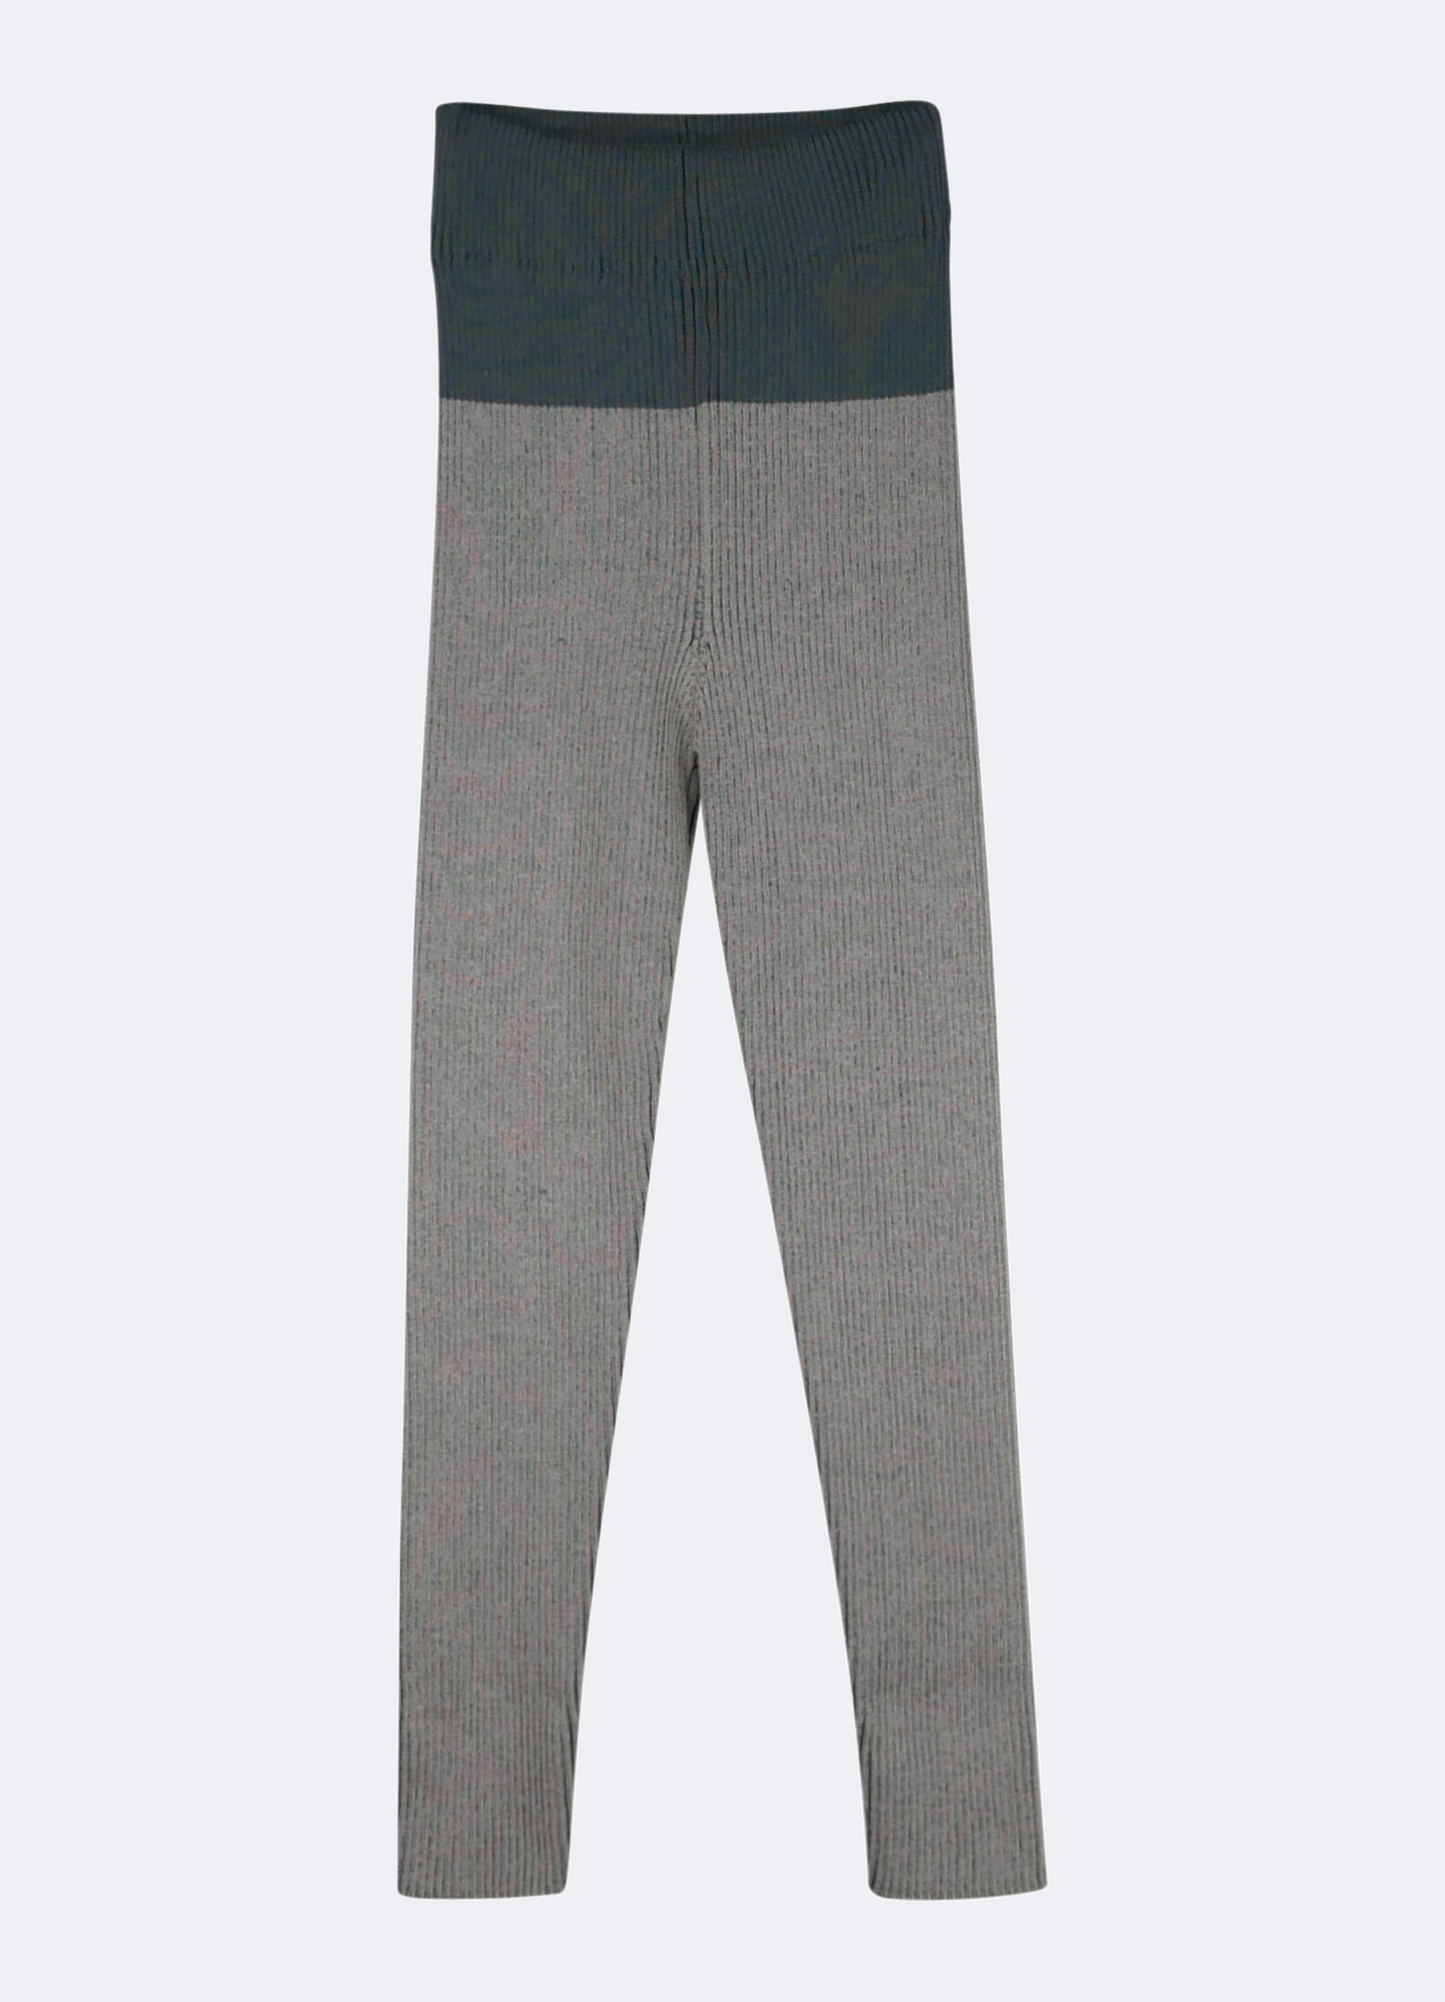 AW23 Mayoral Grey 'It's All Cool' Llama Patterned Leggings Set – Theodore  Couture